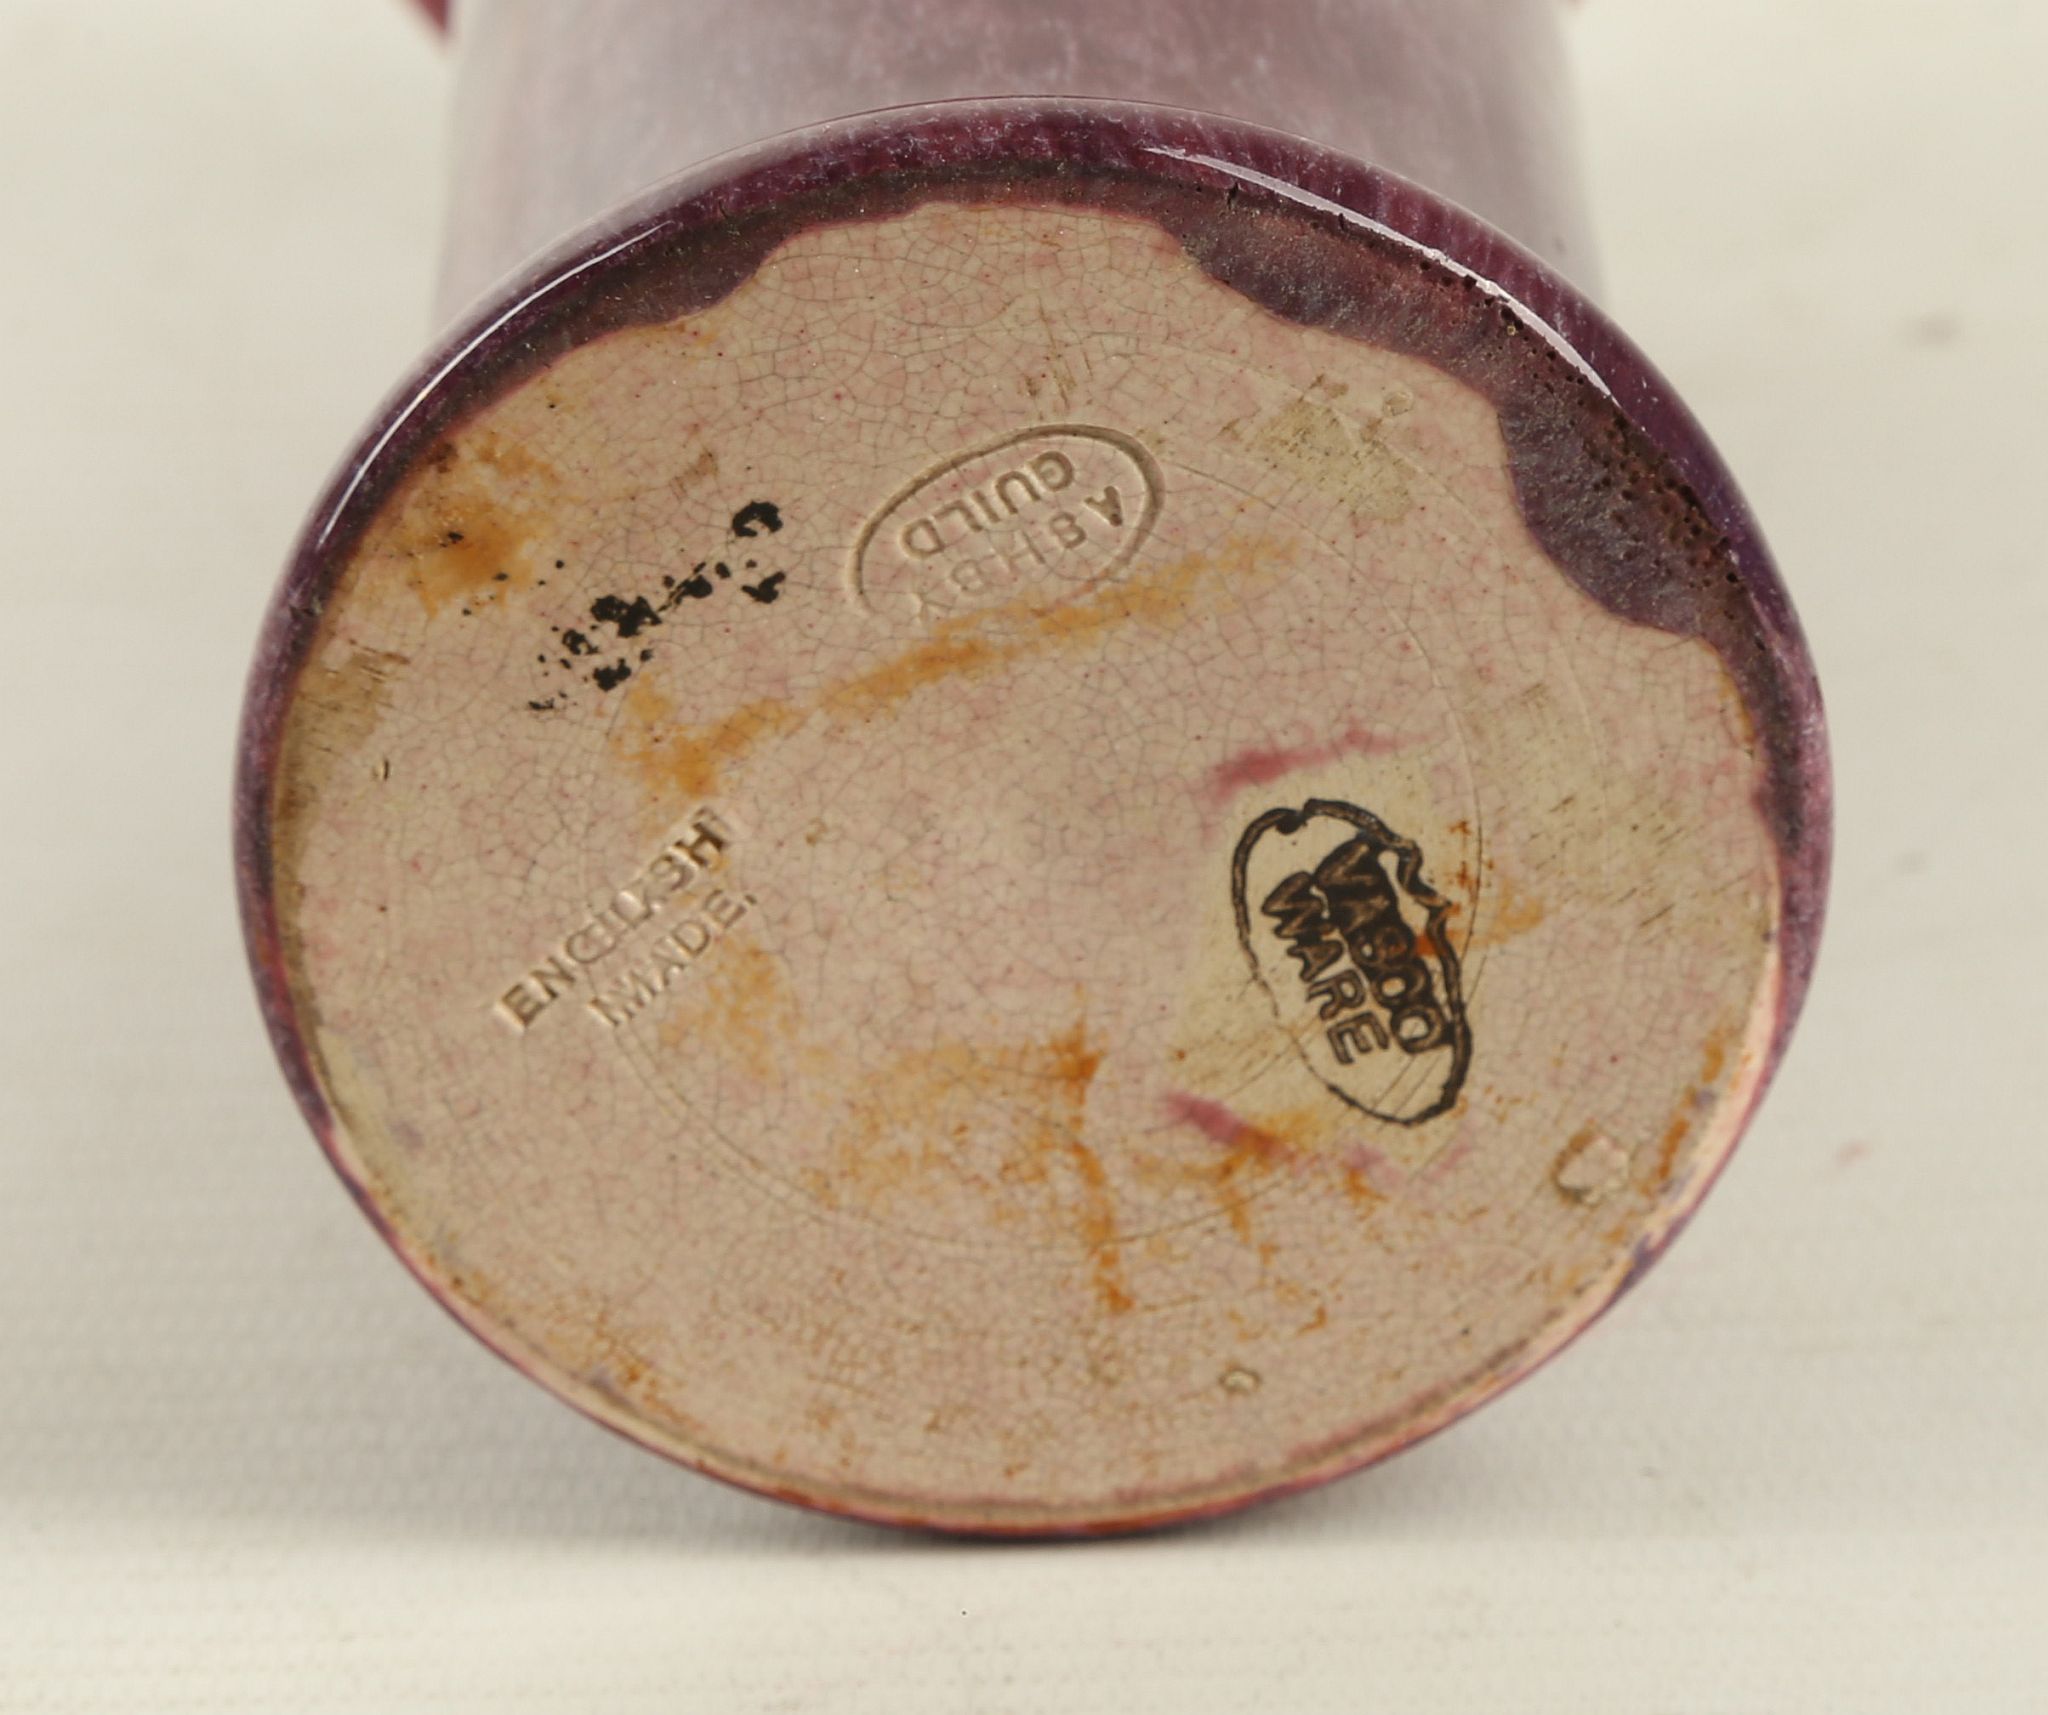 AN EARLY 20th CENTURY ASHBY GUILD POTTERY VASE, CIRCA 1909-1922, having mottled purple glazes, - Image 2 of 2